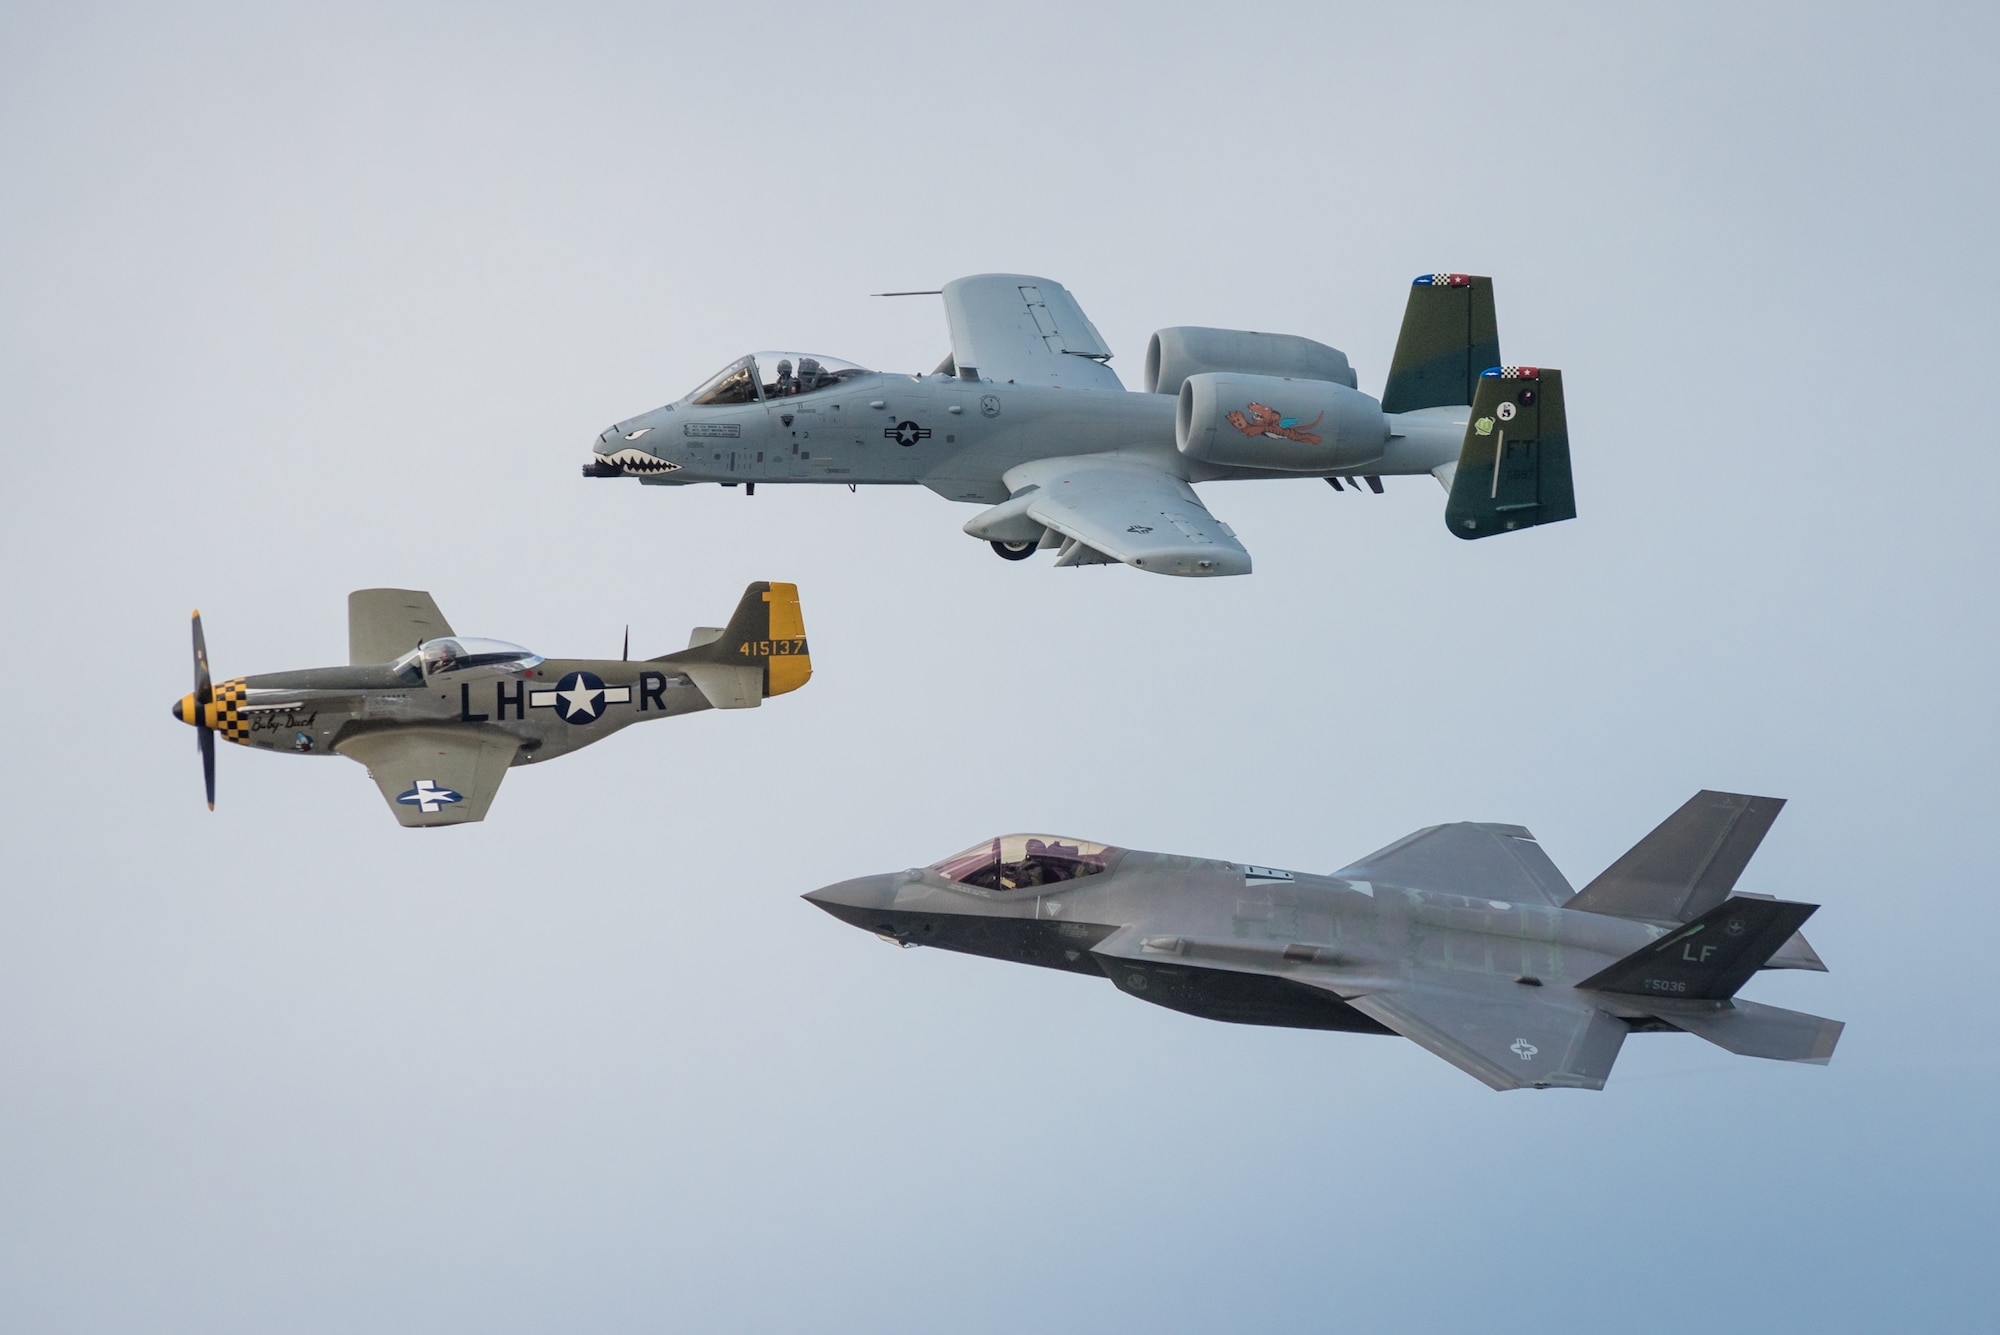 In honor of the U.S. Air Force 70th Anniversary, a trio of historic and modern aircraft fly an aerial demonstration over the Ohio River during the Thunder Over Louisville air show in Louisville, Ky., April 22, 2017. The group is comprised of (from left to right) a P-51 Mustang fighter-bomber, a U.S. Air Force A-10 Thunderbolt II close air support aircraft and a U.S. Air Force F-35 Lightning II. The F-35, from Luke Air Force Base, Ariz., is the Air Force’s newest fighter aircraft. (U.S. Air National Guard photo by Lt. Col. Dale Greer)